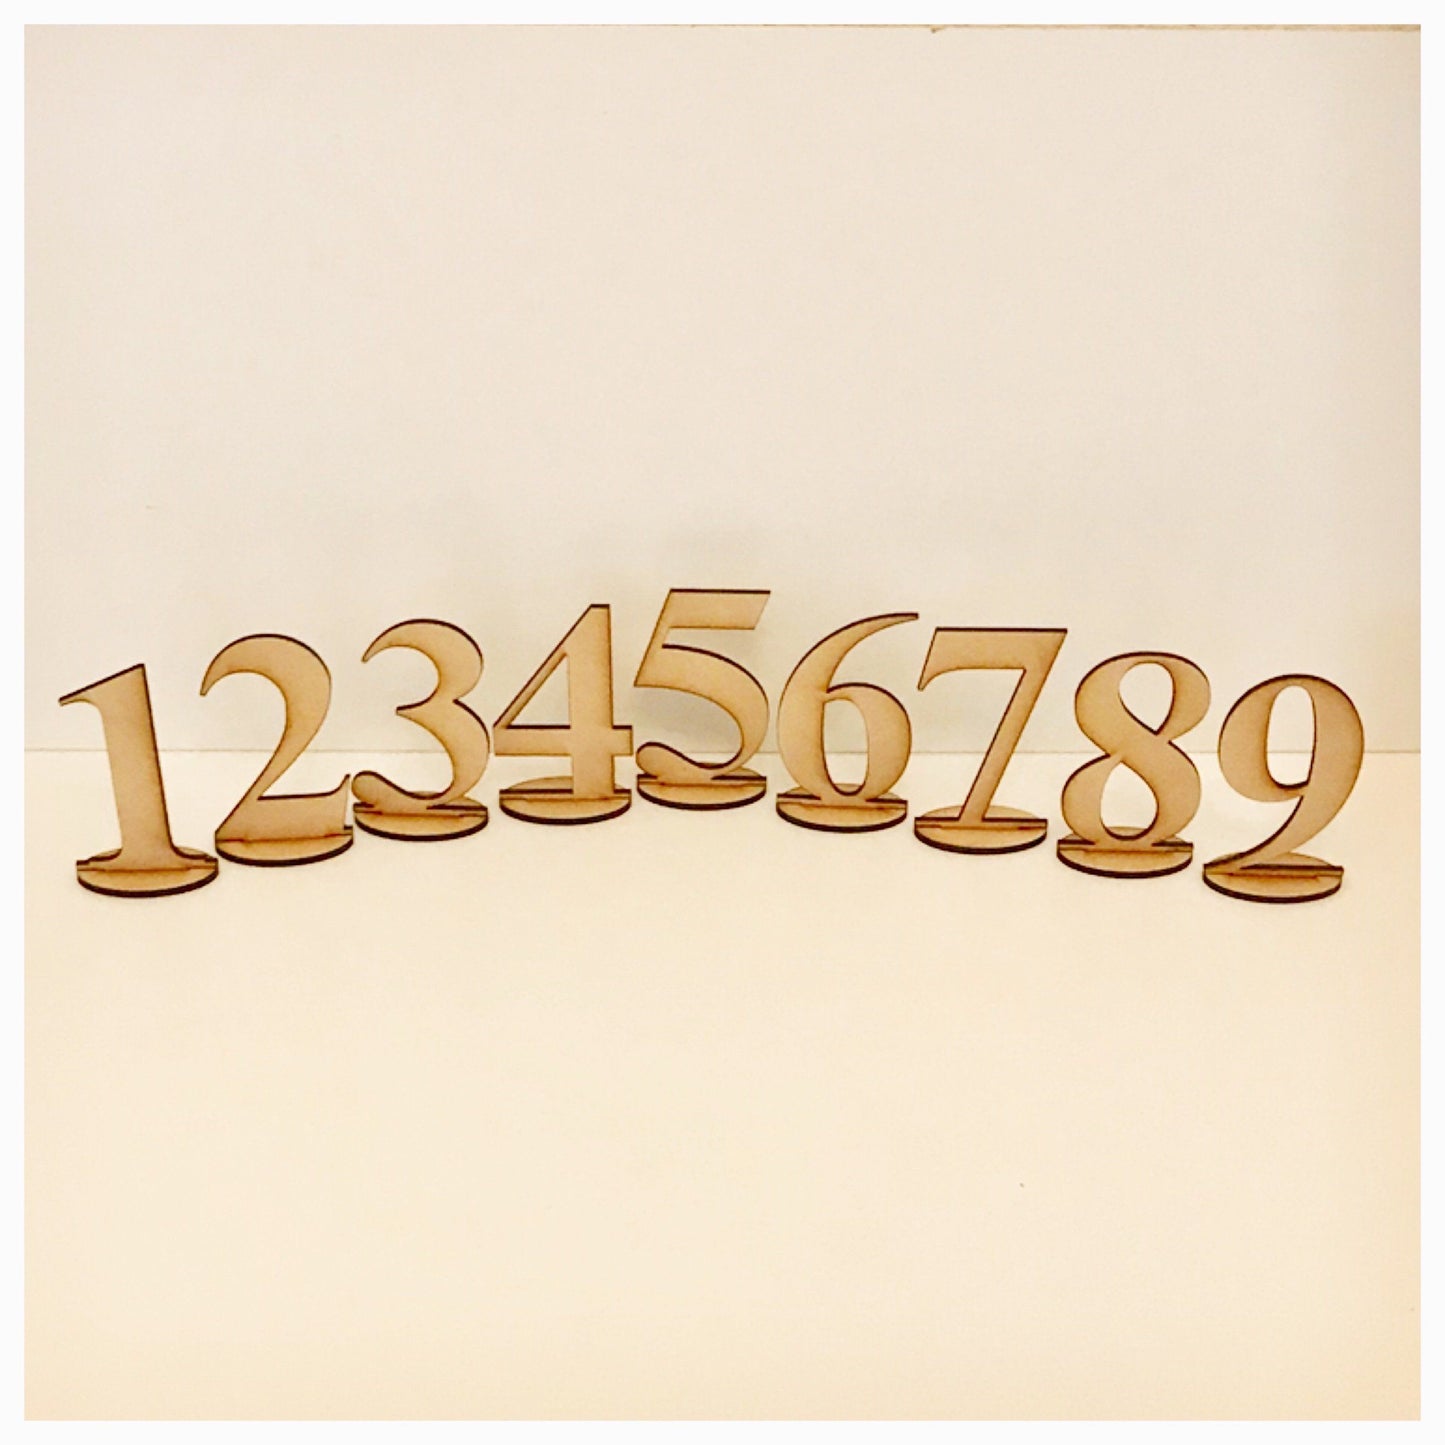 Table Number Wooden Free Standing MDF DIY Raw Event Wedding Party Decoration 3mm